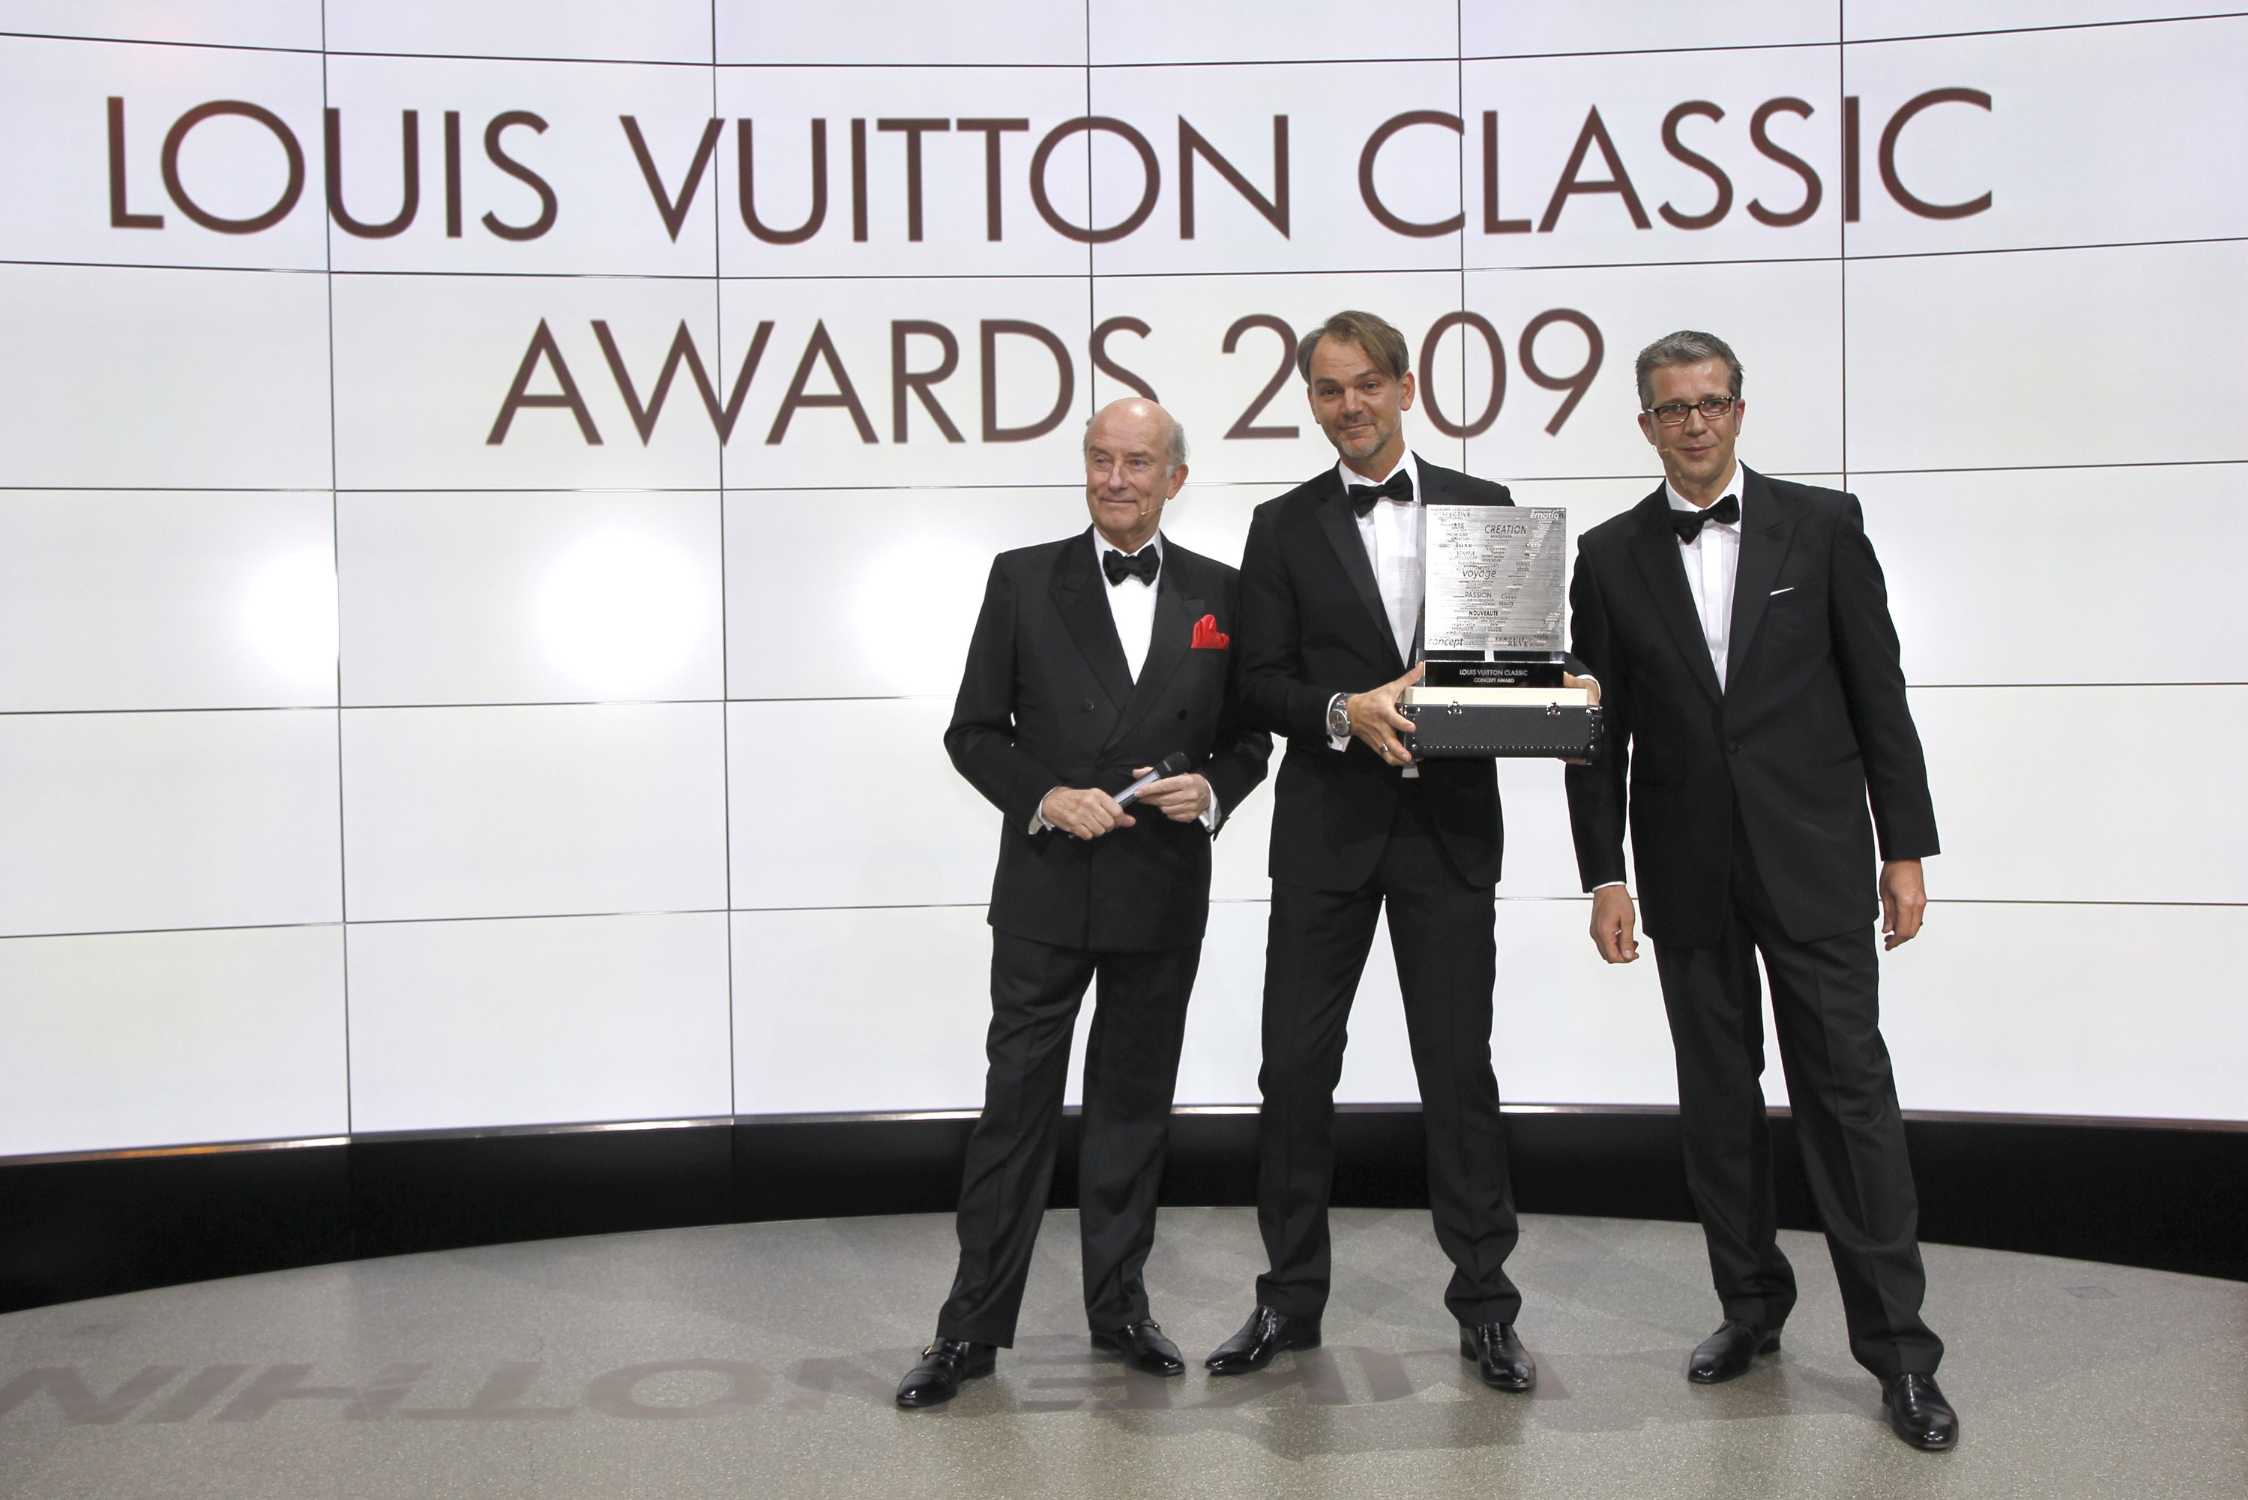 Price-Giving Ceremony Louis Vuitton Classic Award 28 February 2010. From left: Chief Judge ...